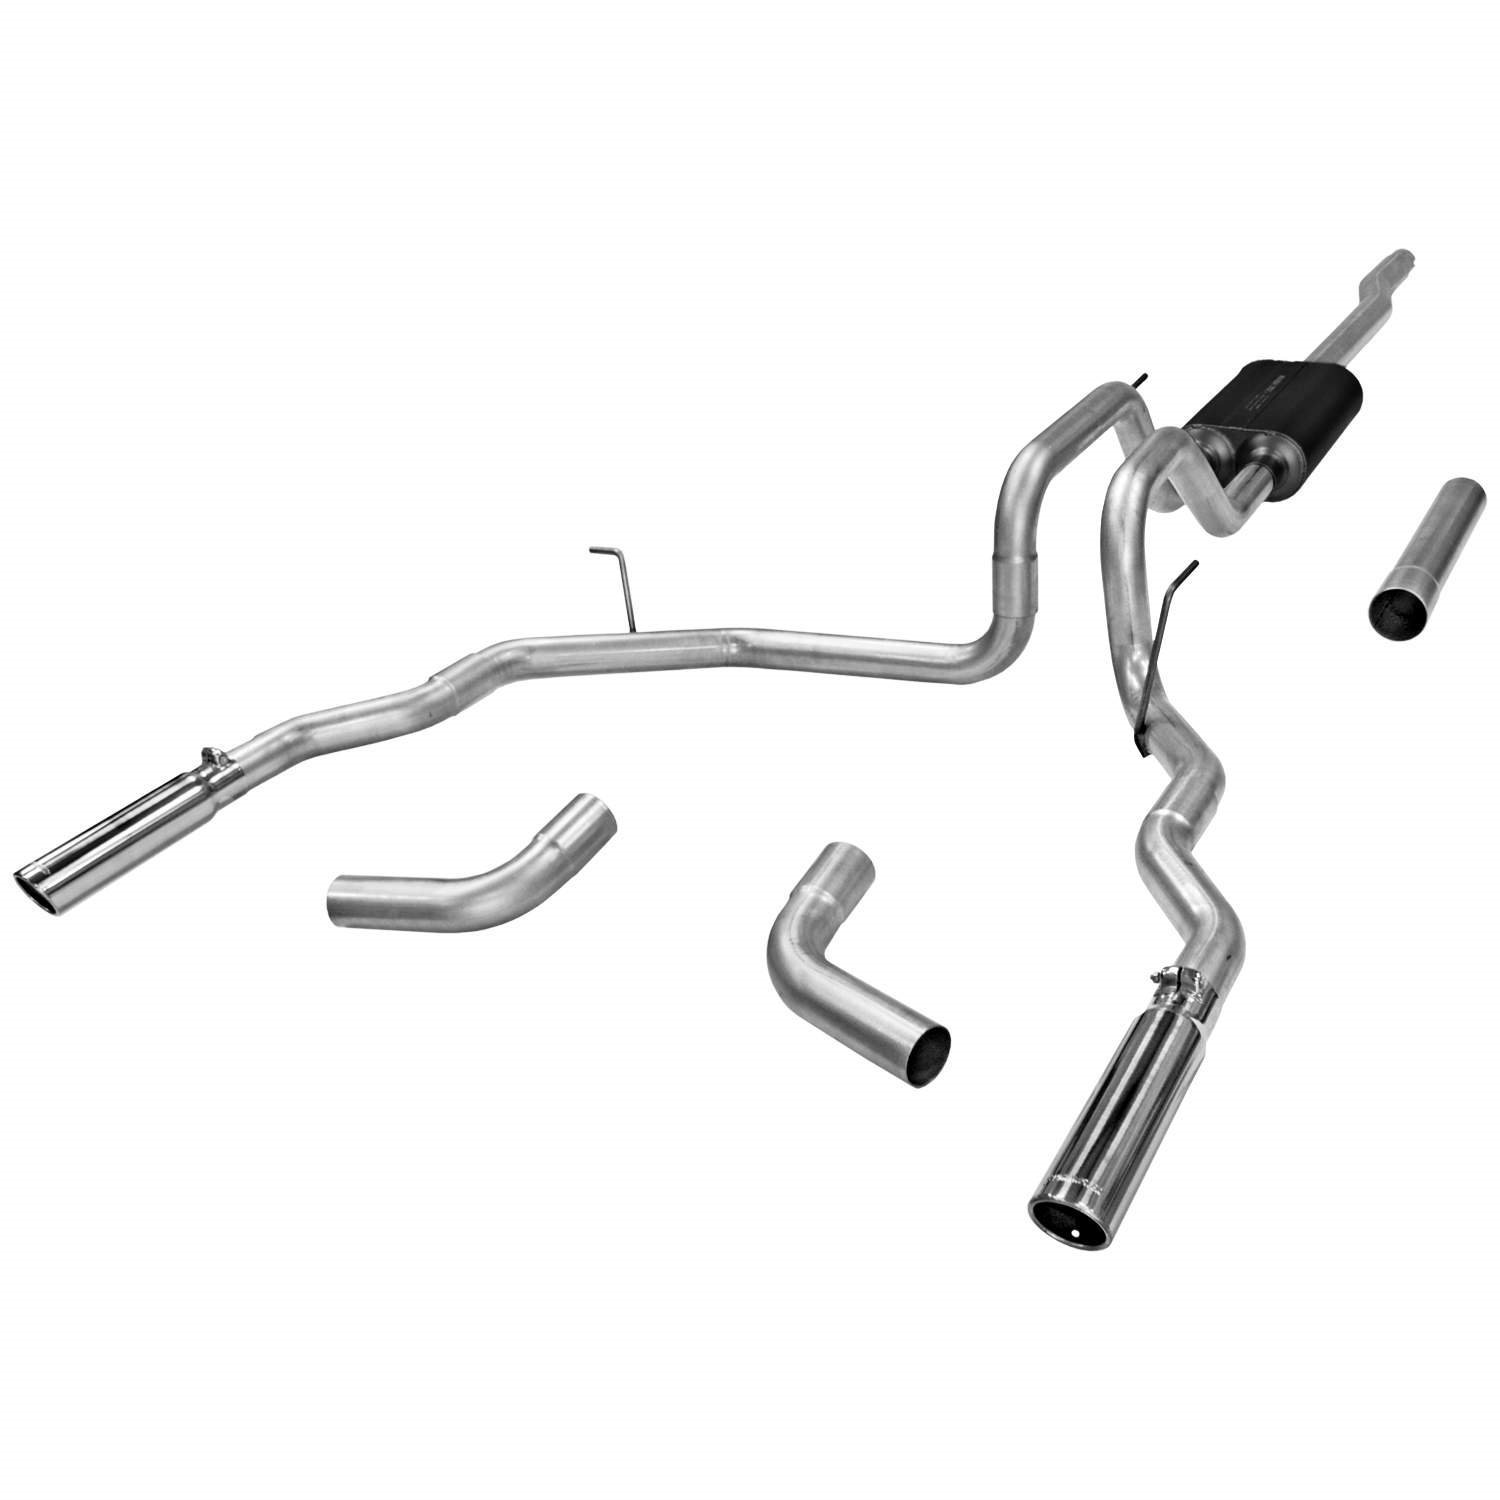 Force II Cat-Back Exhaust System 2004-08 Ford F-150 4.6/5.4L